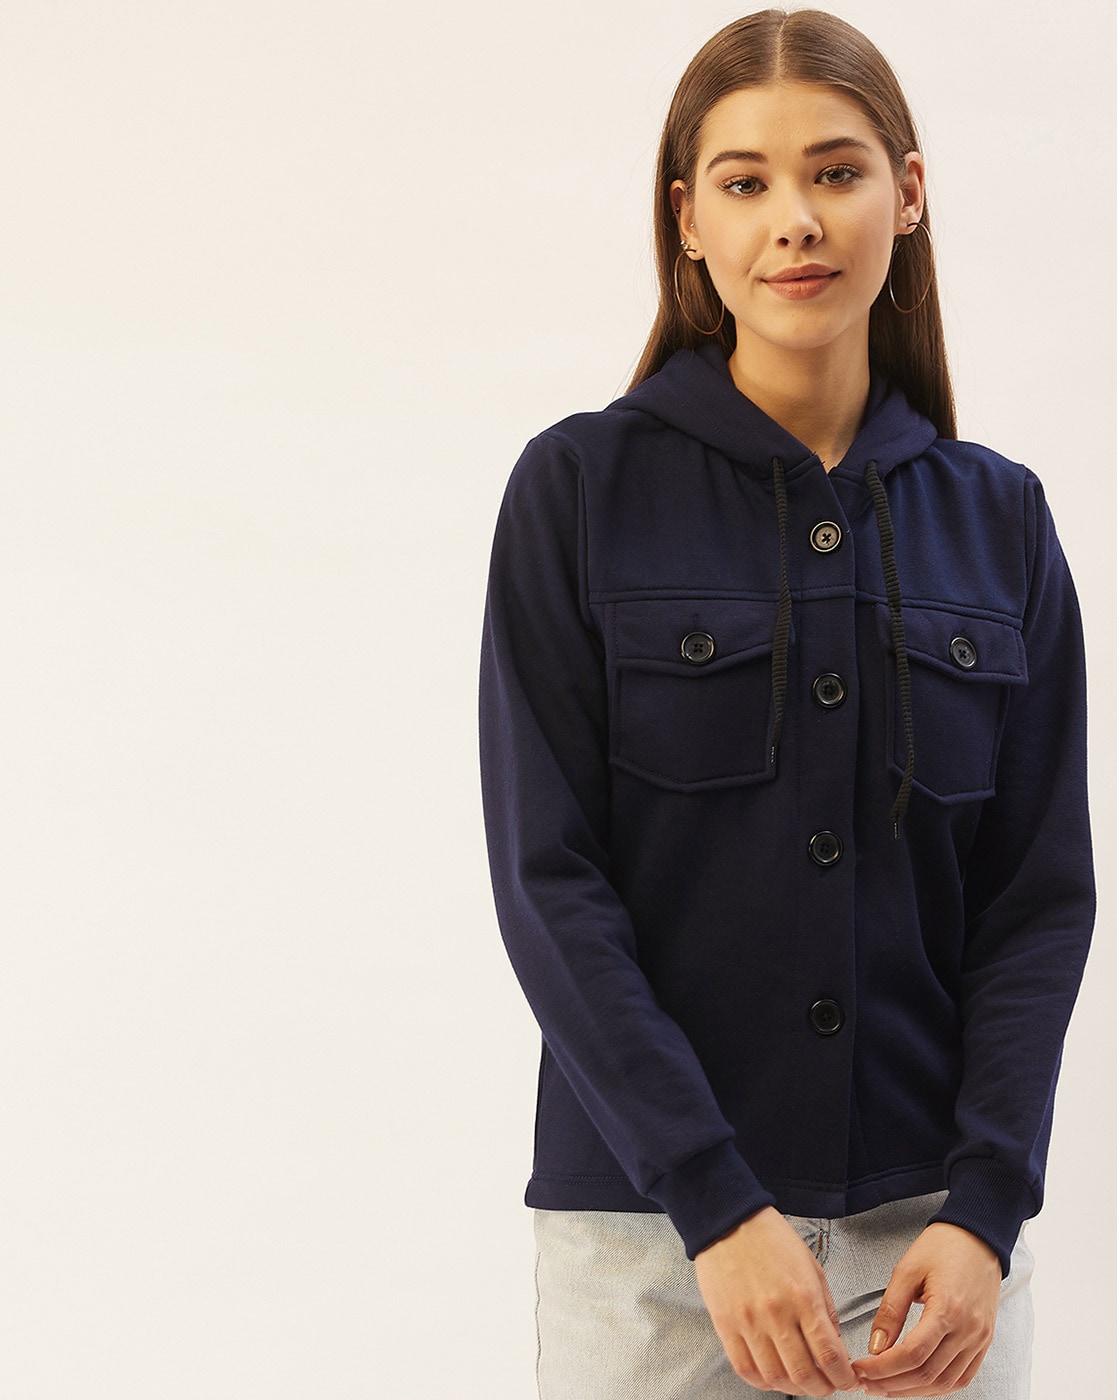 Crop Jacket with Button Closure